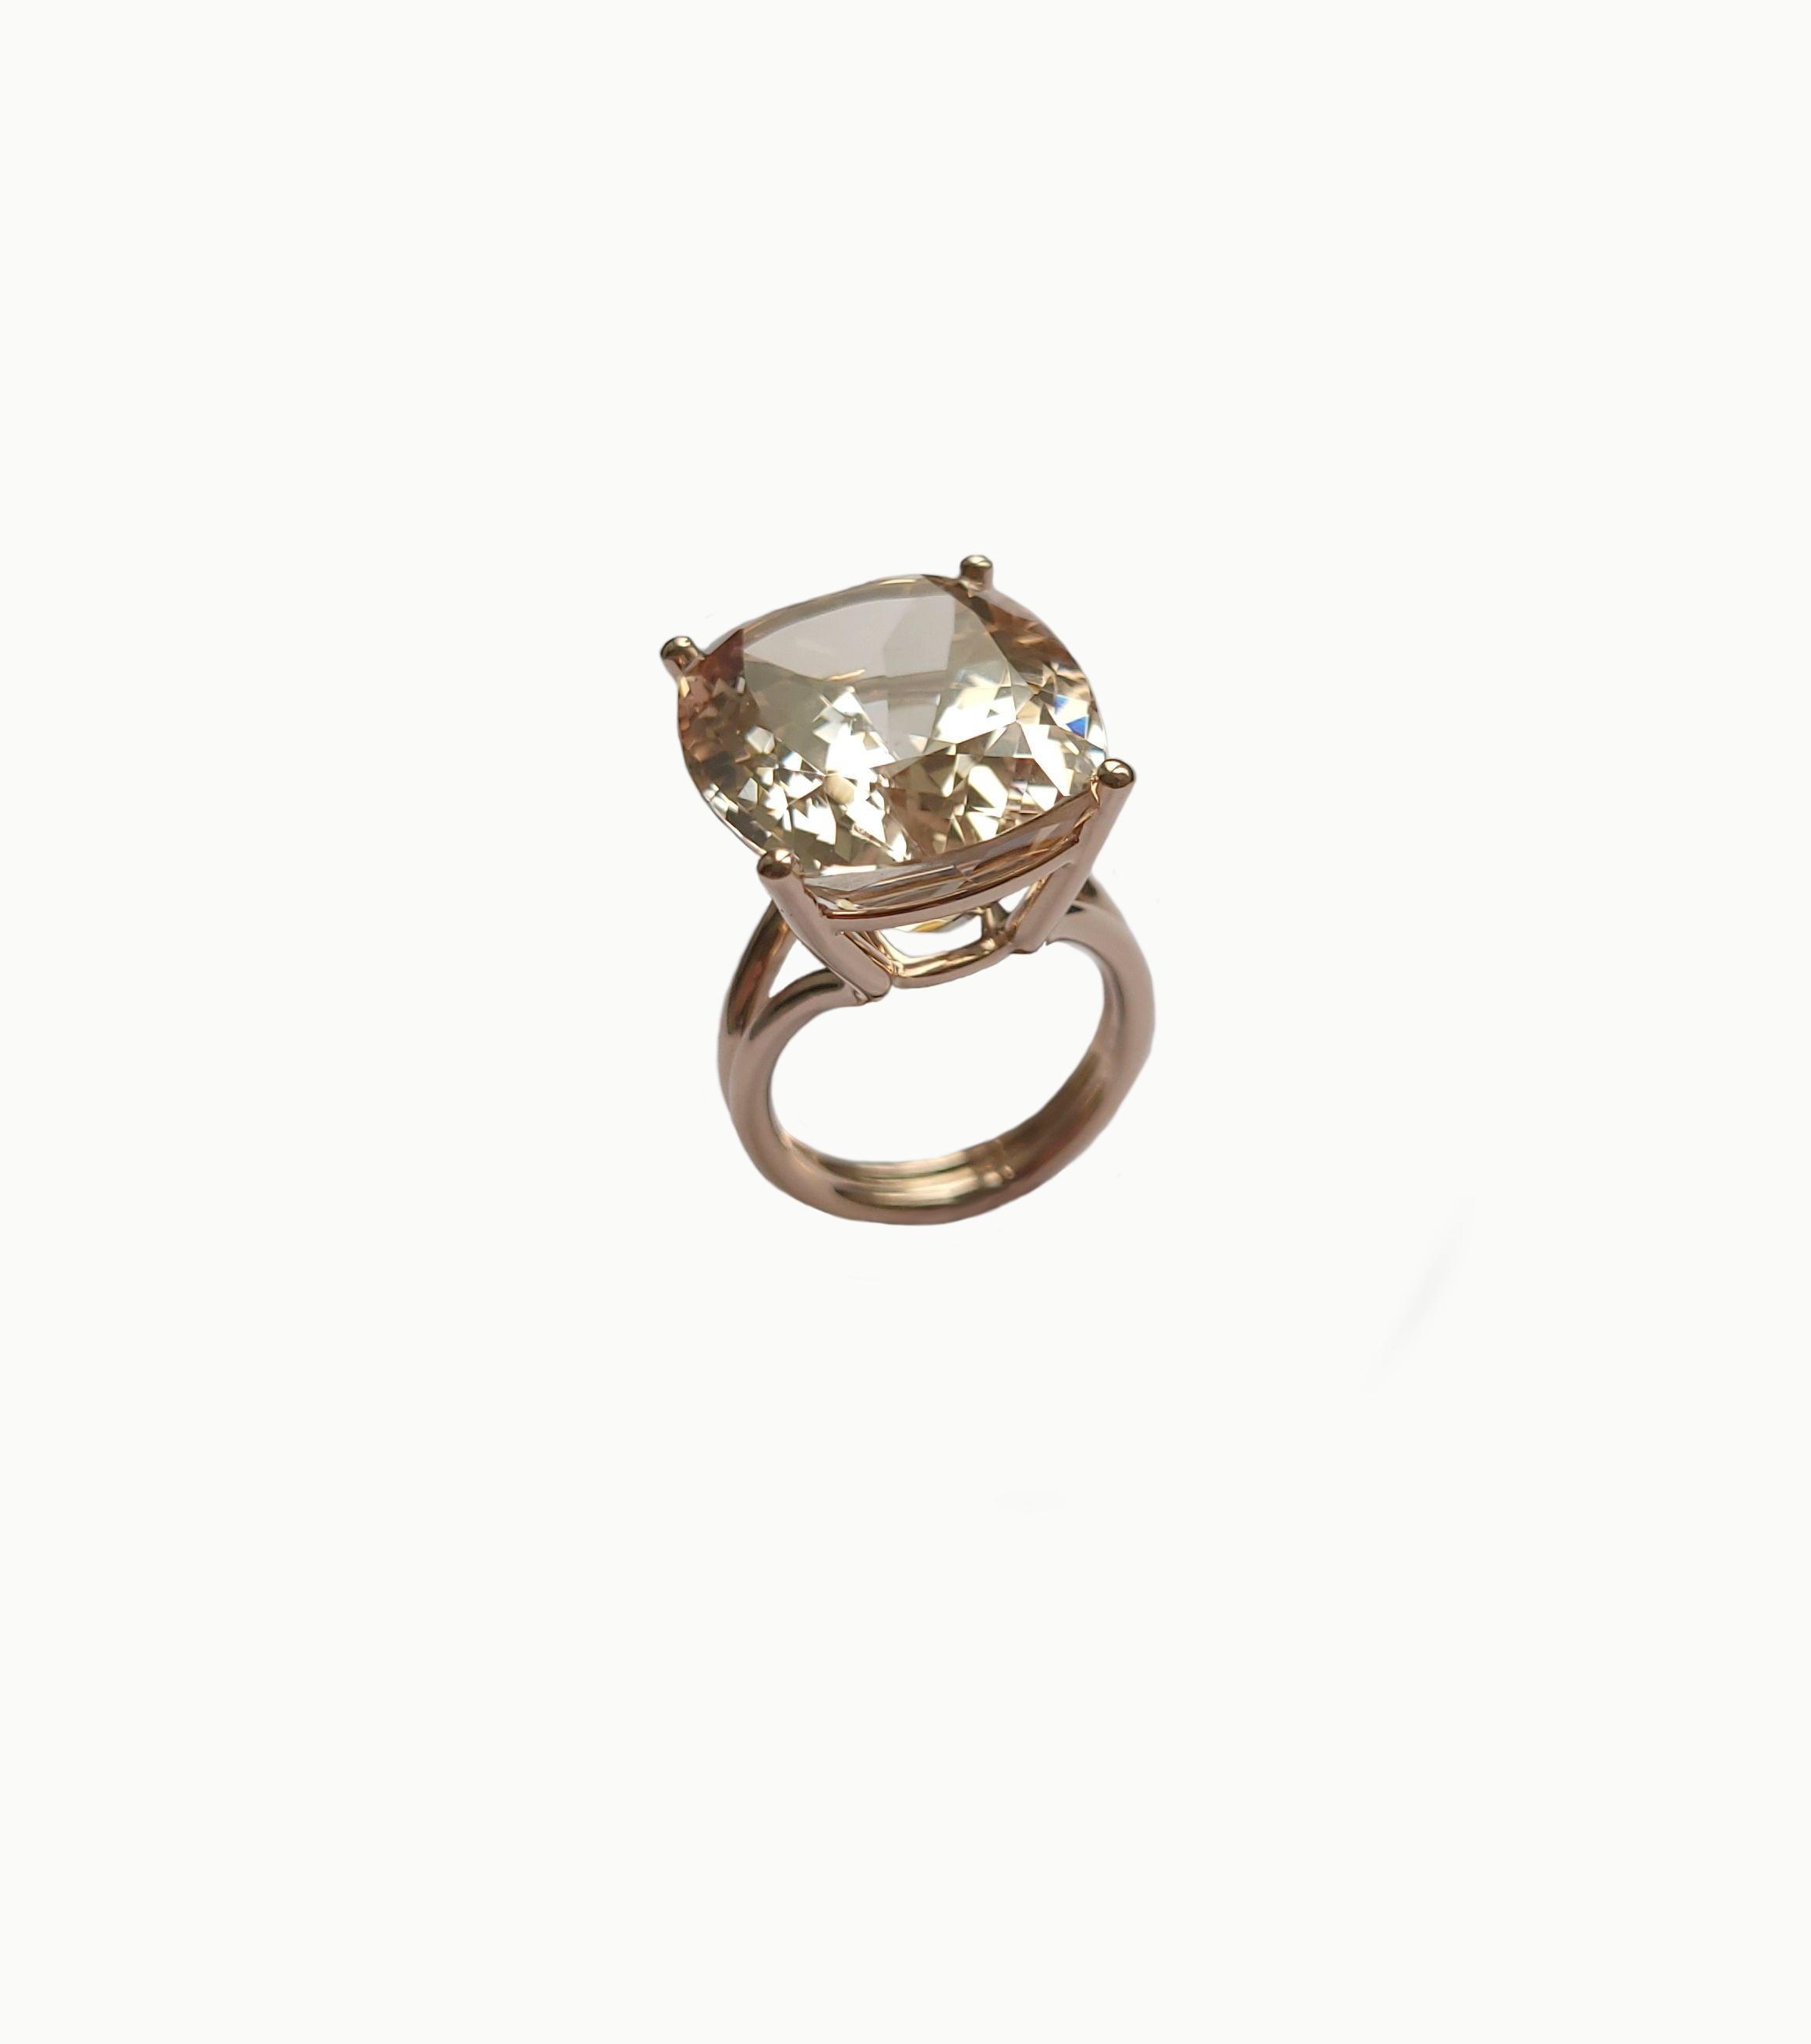 33.57 Carat Precious Topaz Gold Ring by Wagner Preziosen For Sale 3